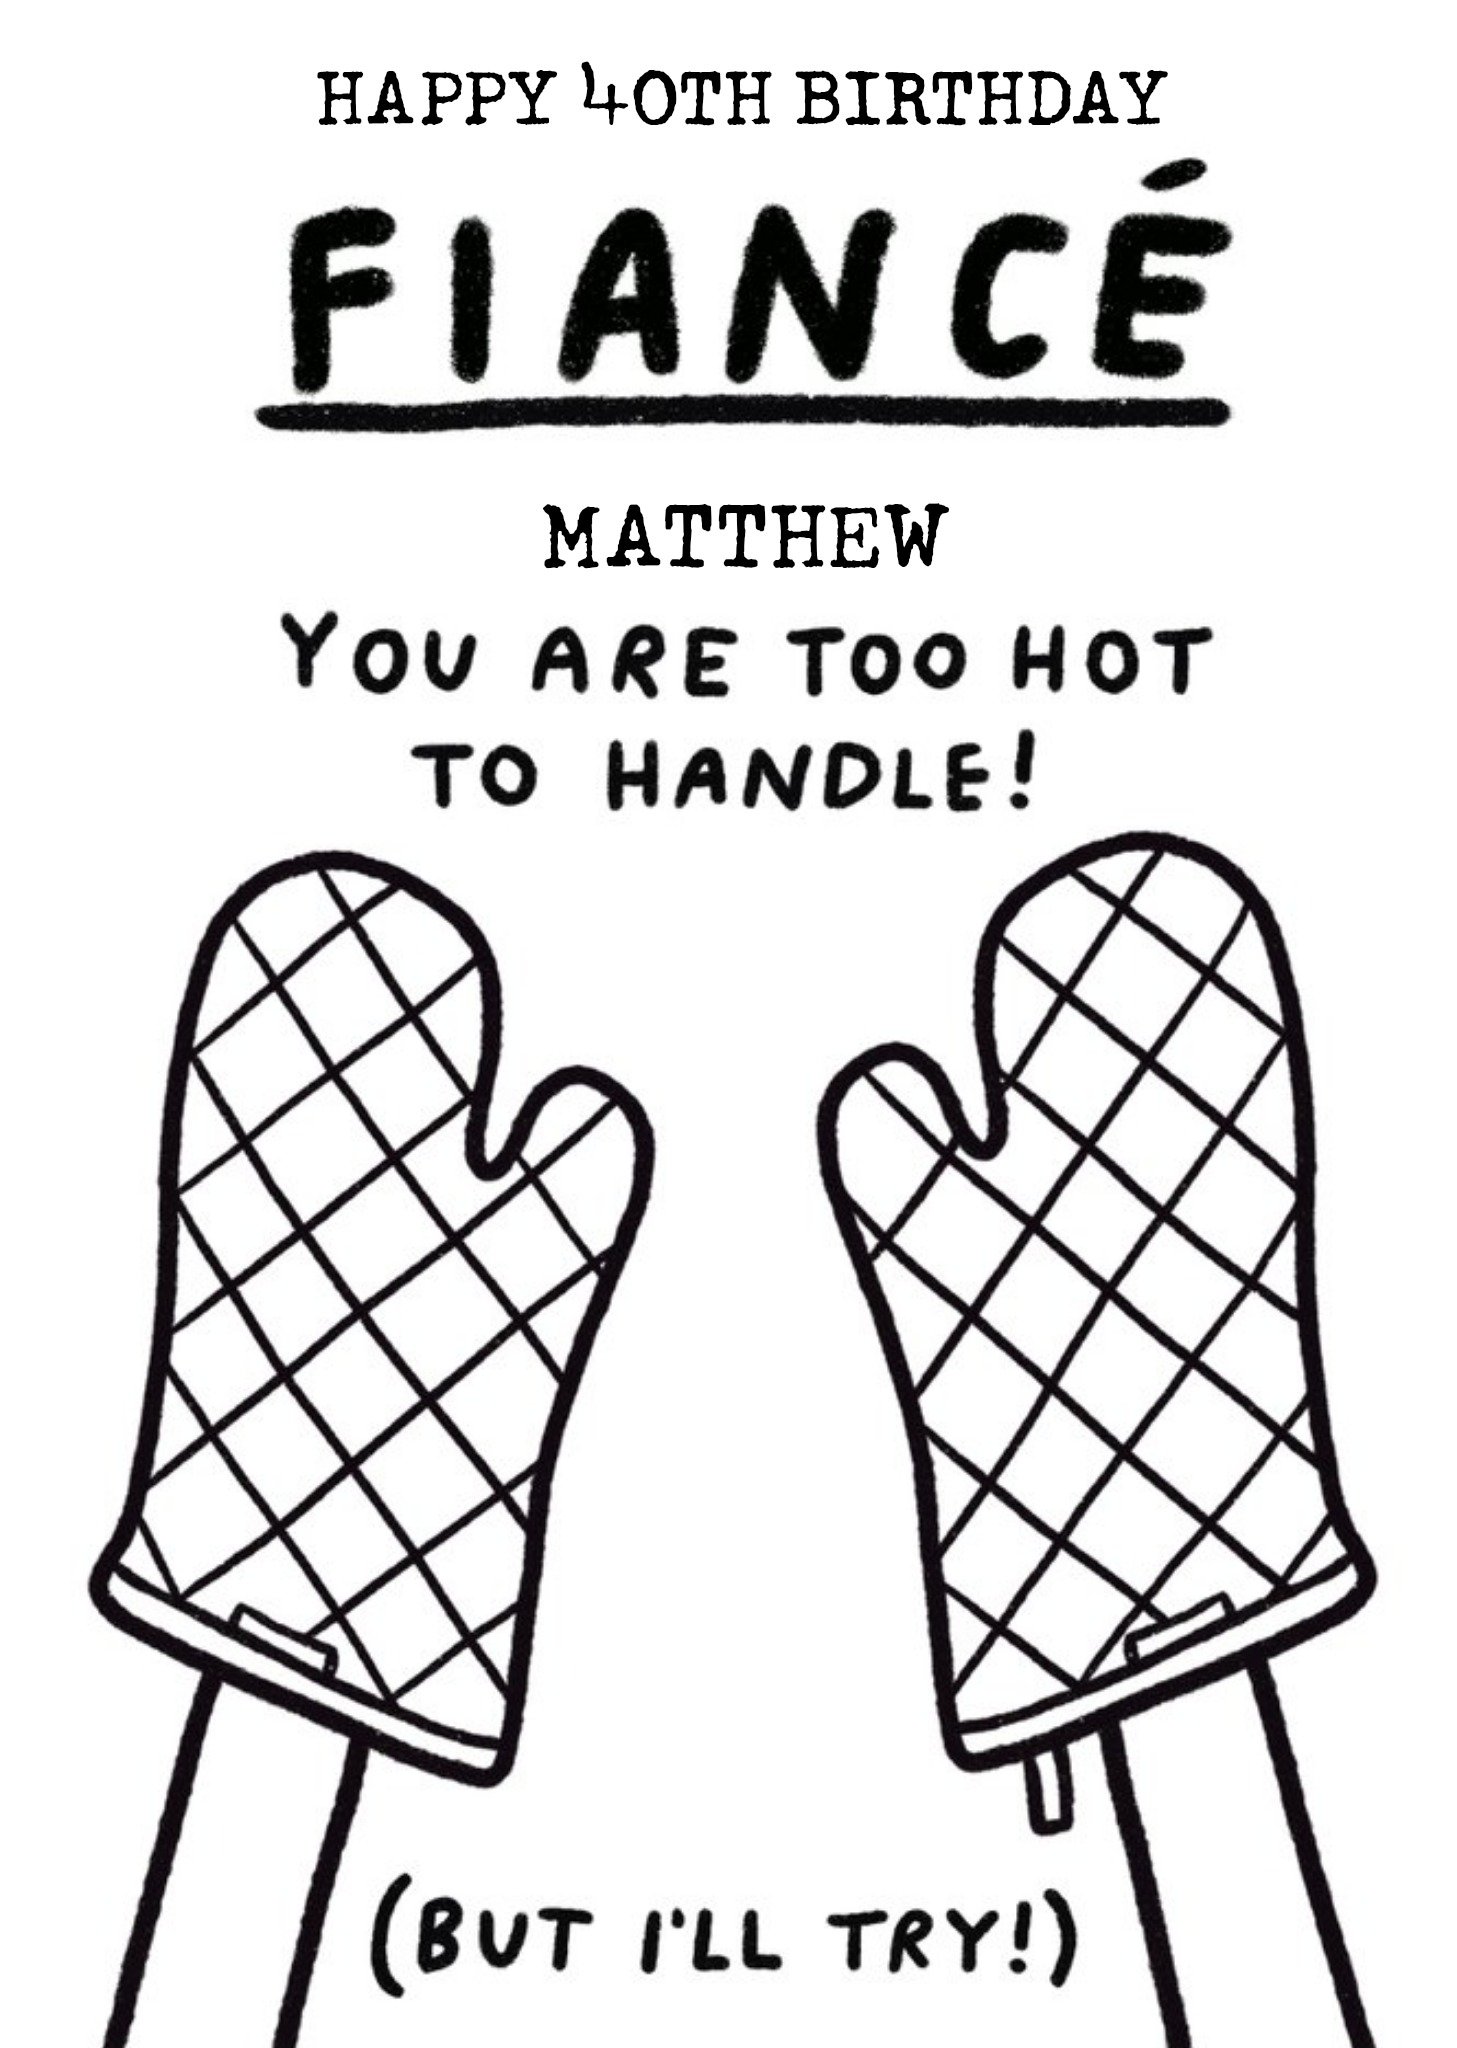 Moonpig Illustration Of A Pair Of Oven Gloves Too Hot To Handle Fiance's Birthday Card Ecard